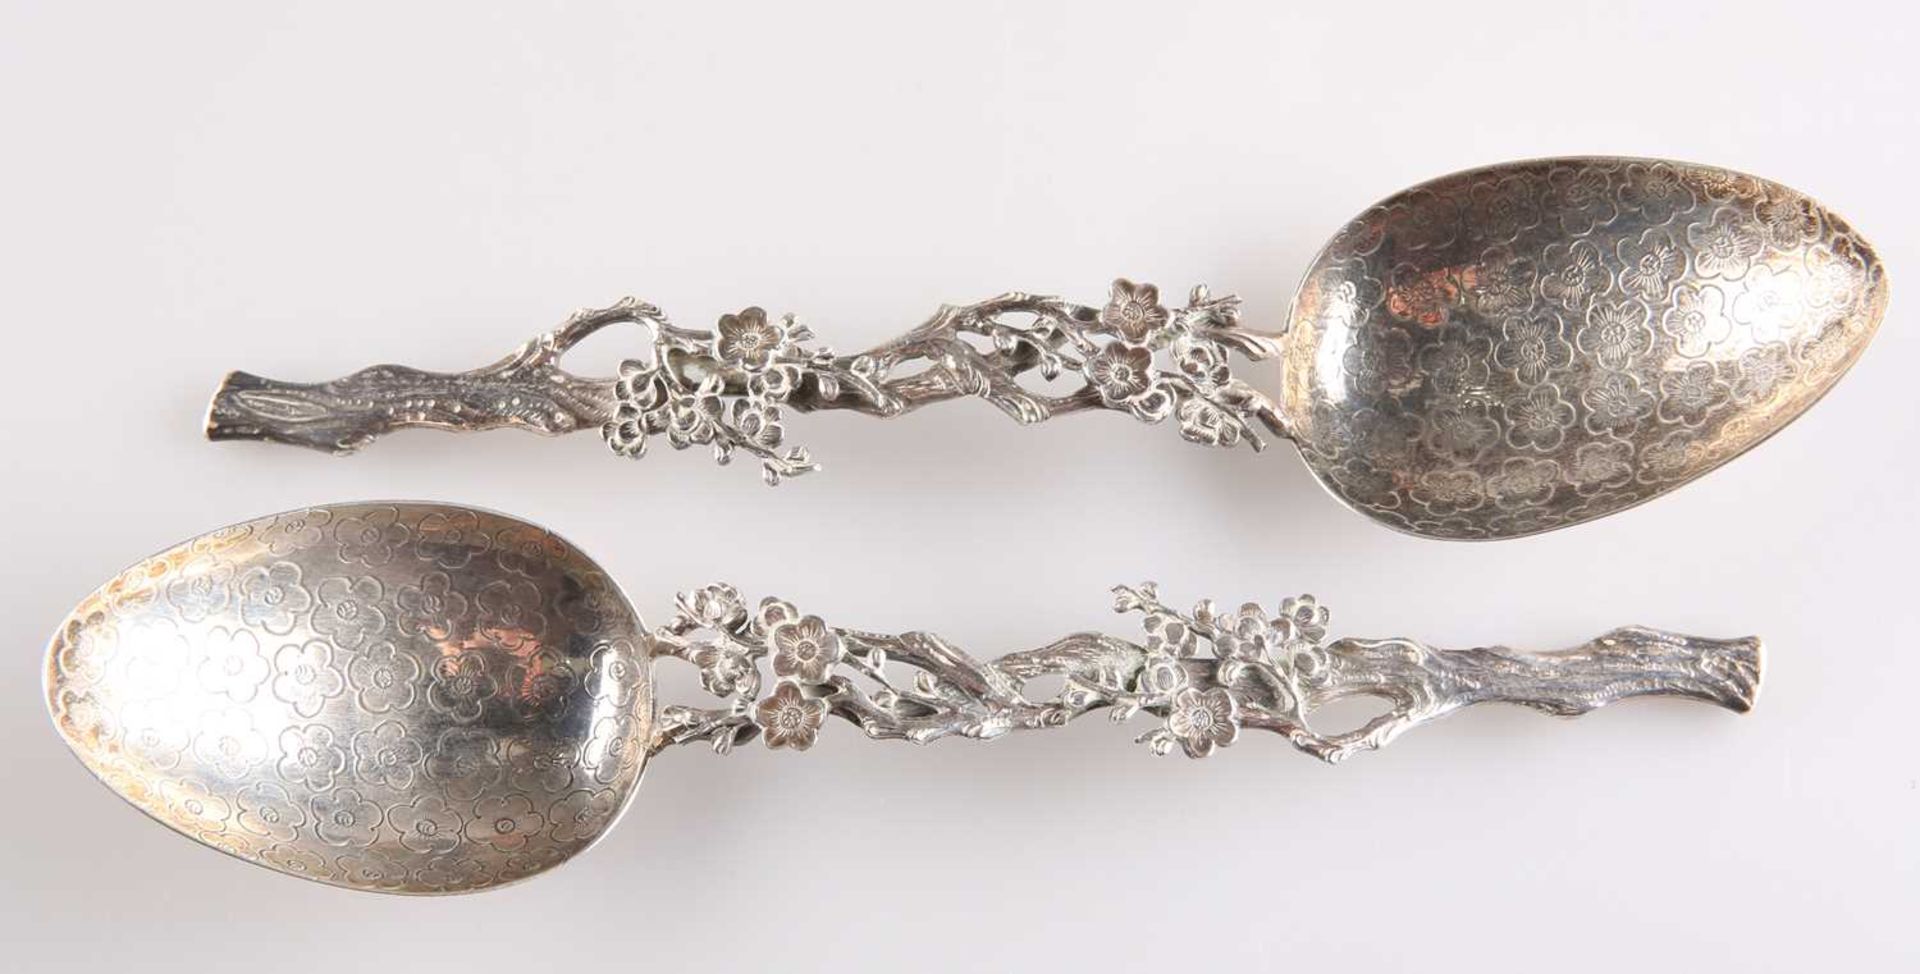 A PAIR OF 19TH CENTURY CHINESE SILVER SPOONS